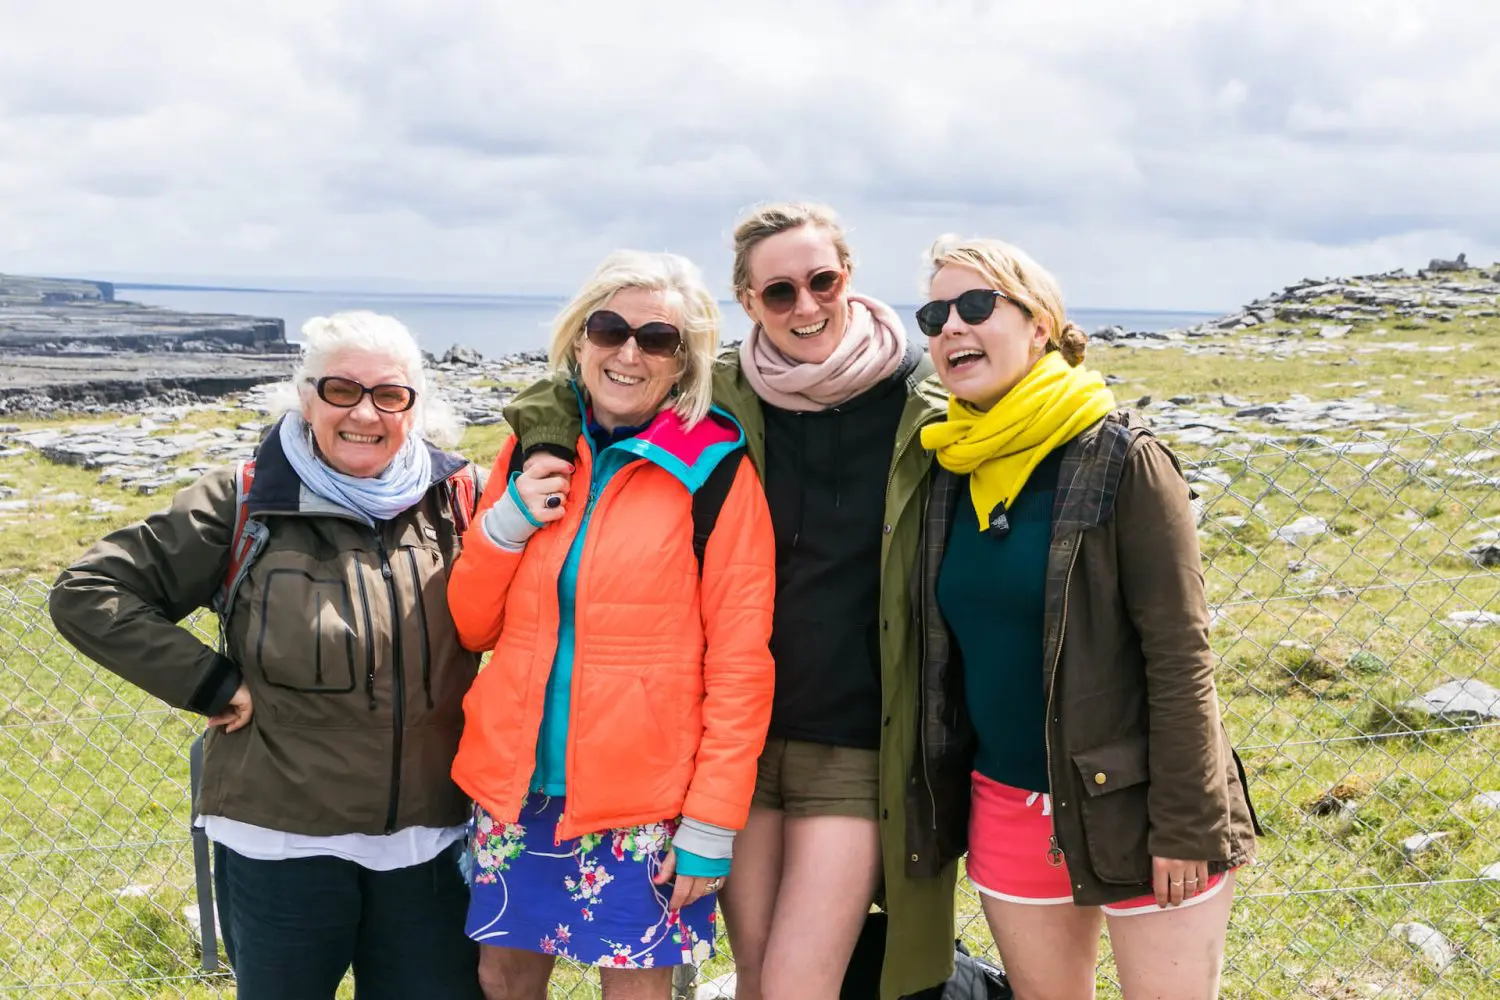 Four women smiling together in an outdoor setting with rocky terrain in Ireland in the background.